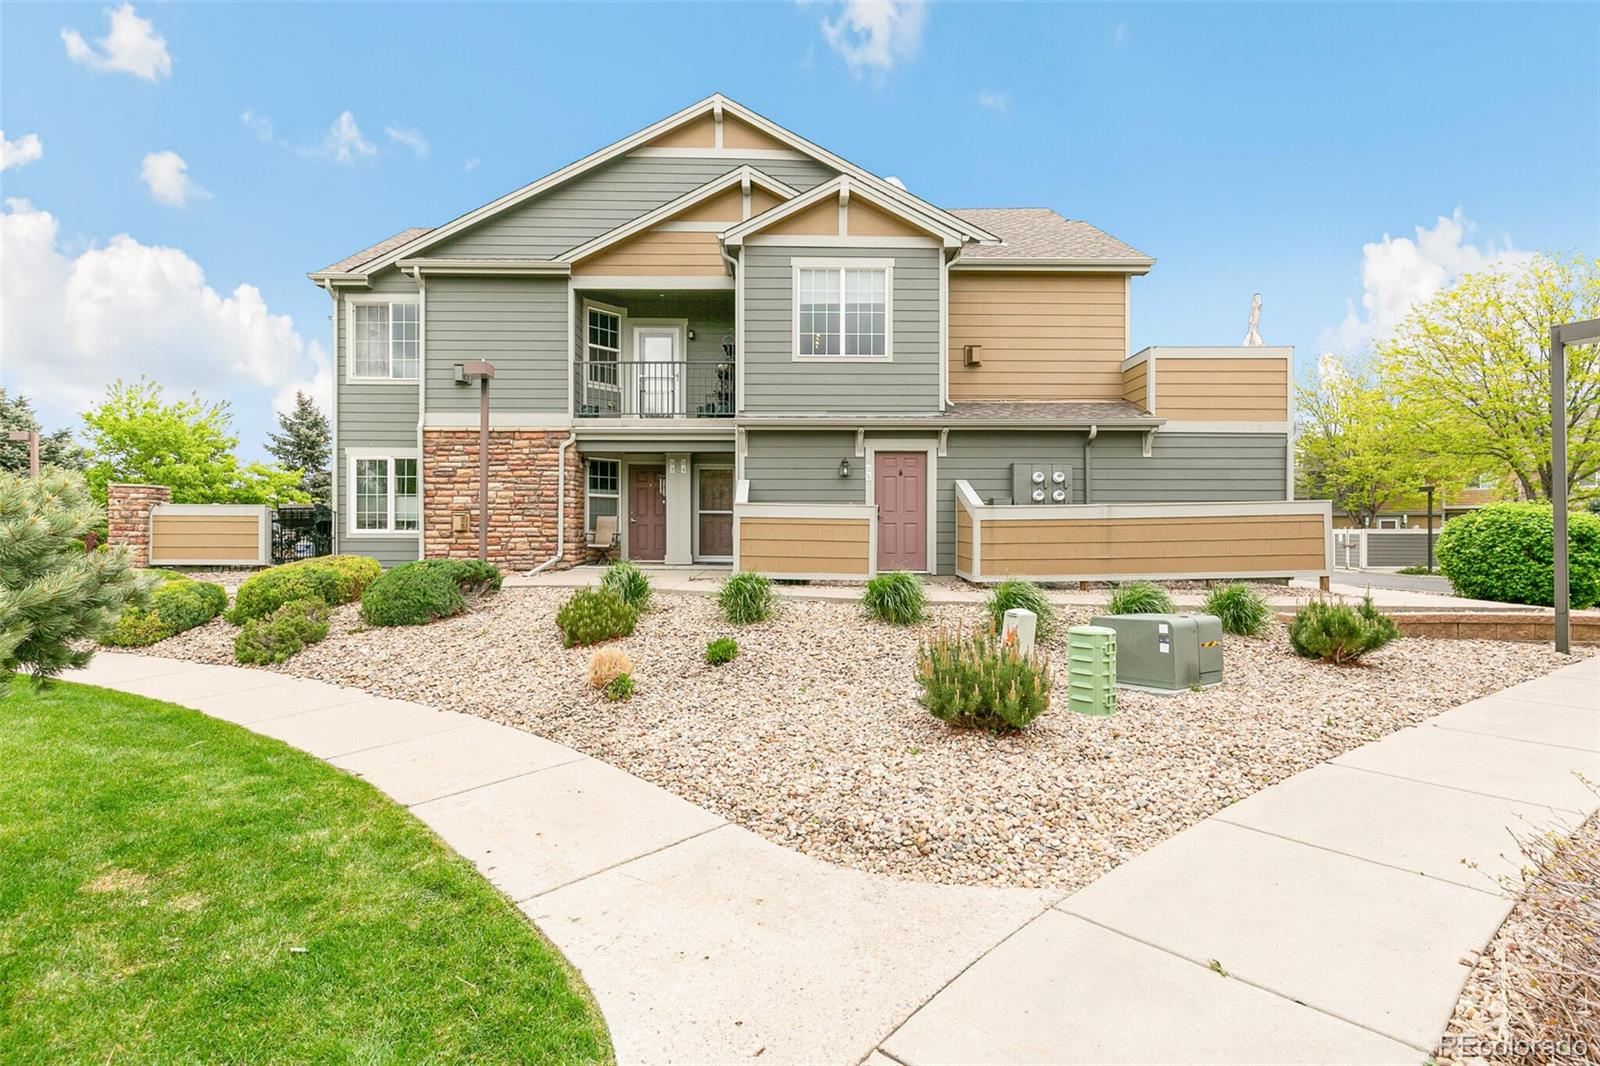 14300  waterside lane, Broomfield sold home. Closed on 2024-07-23 for $420,000.